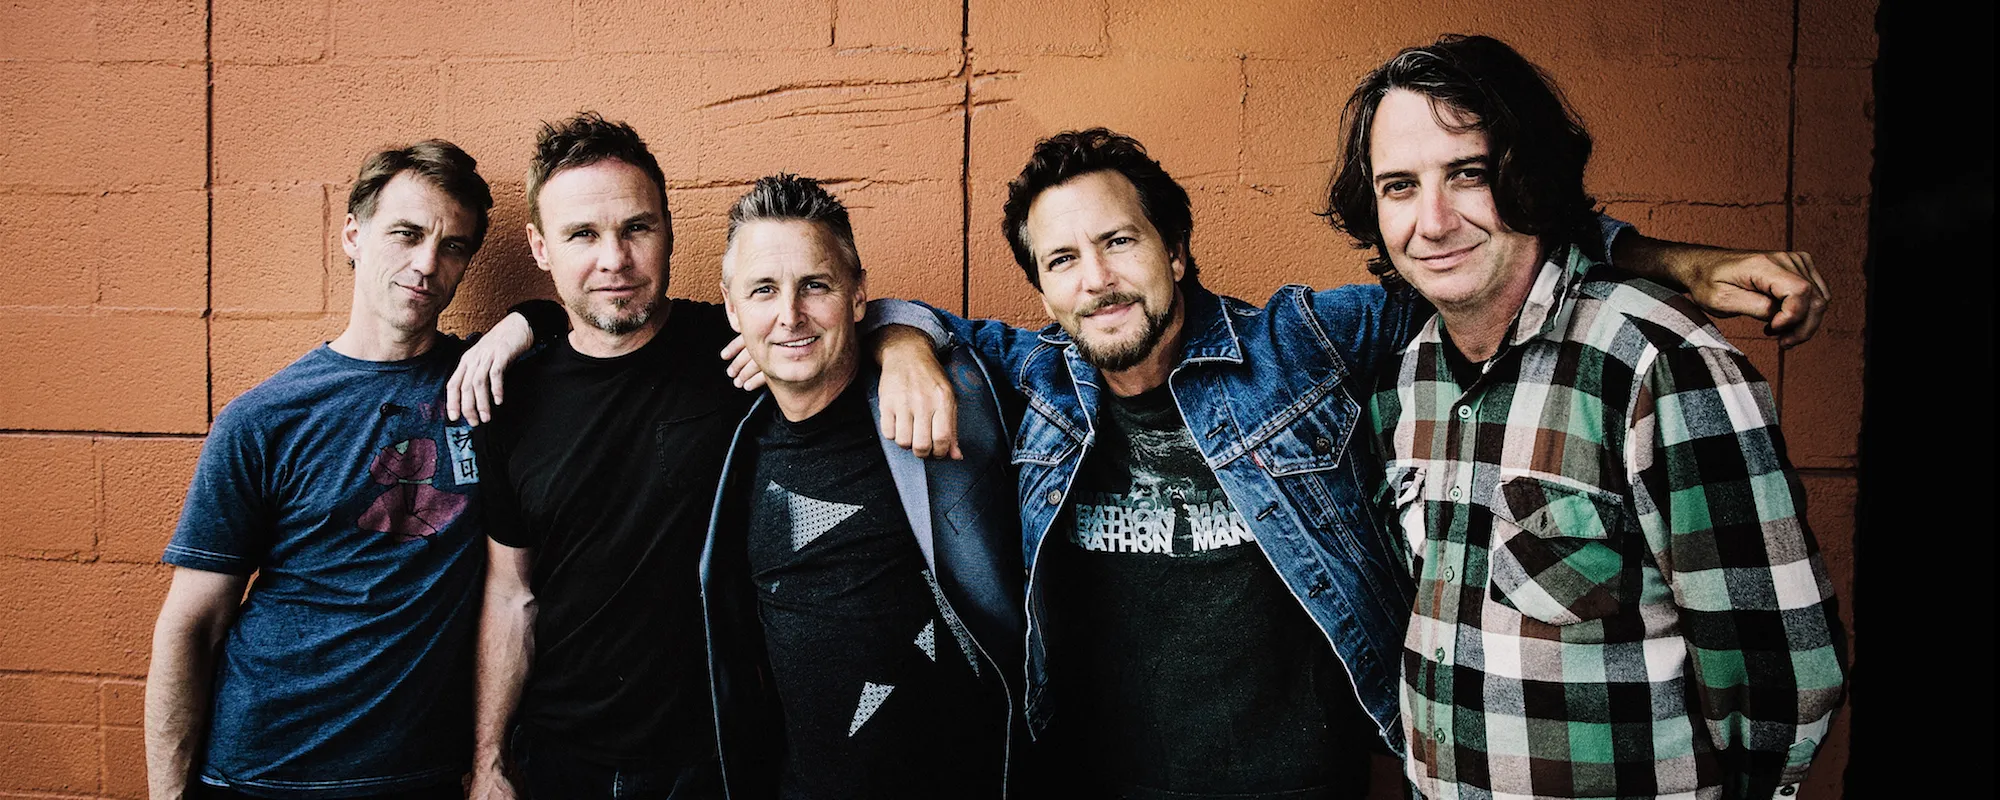 The Meaning Behind the Band Name: Pearl Jam